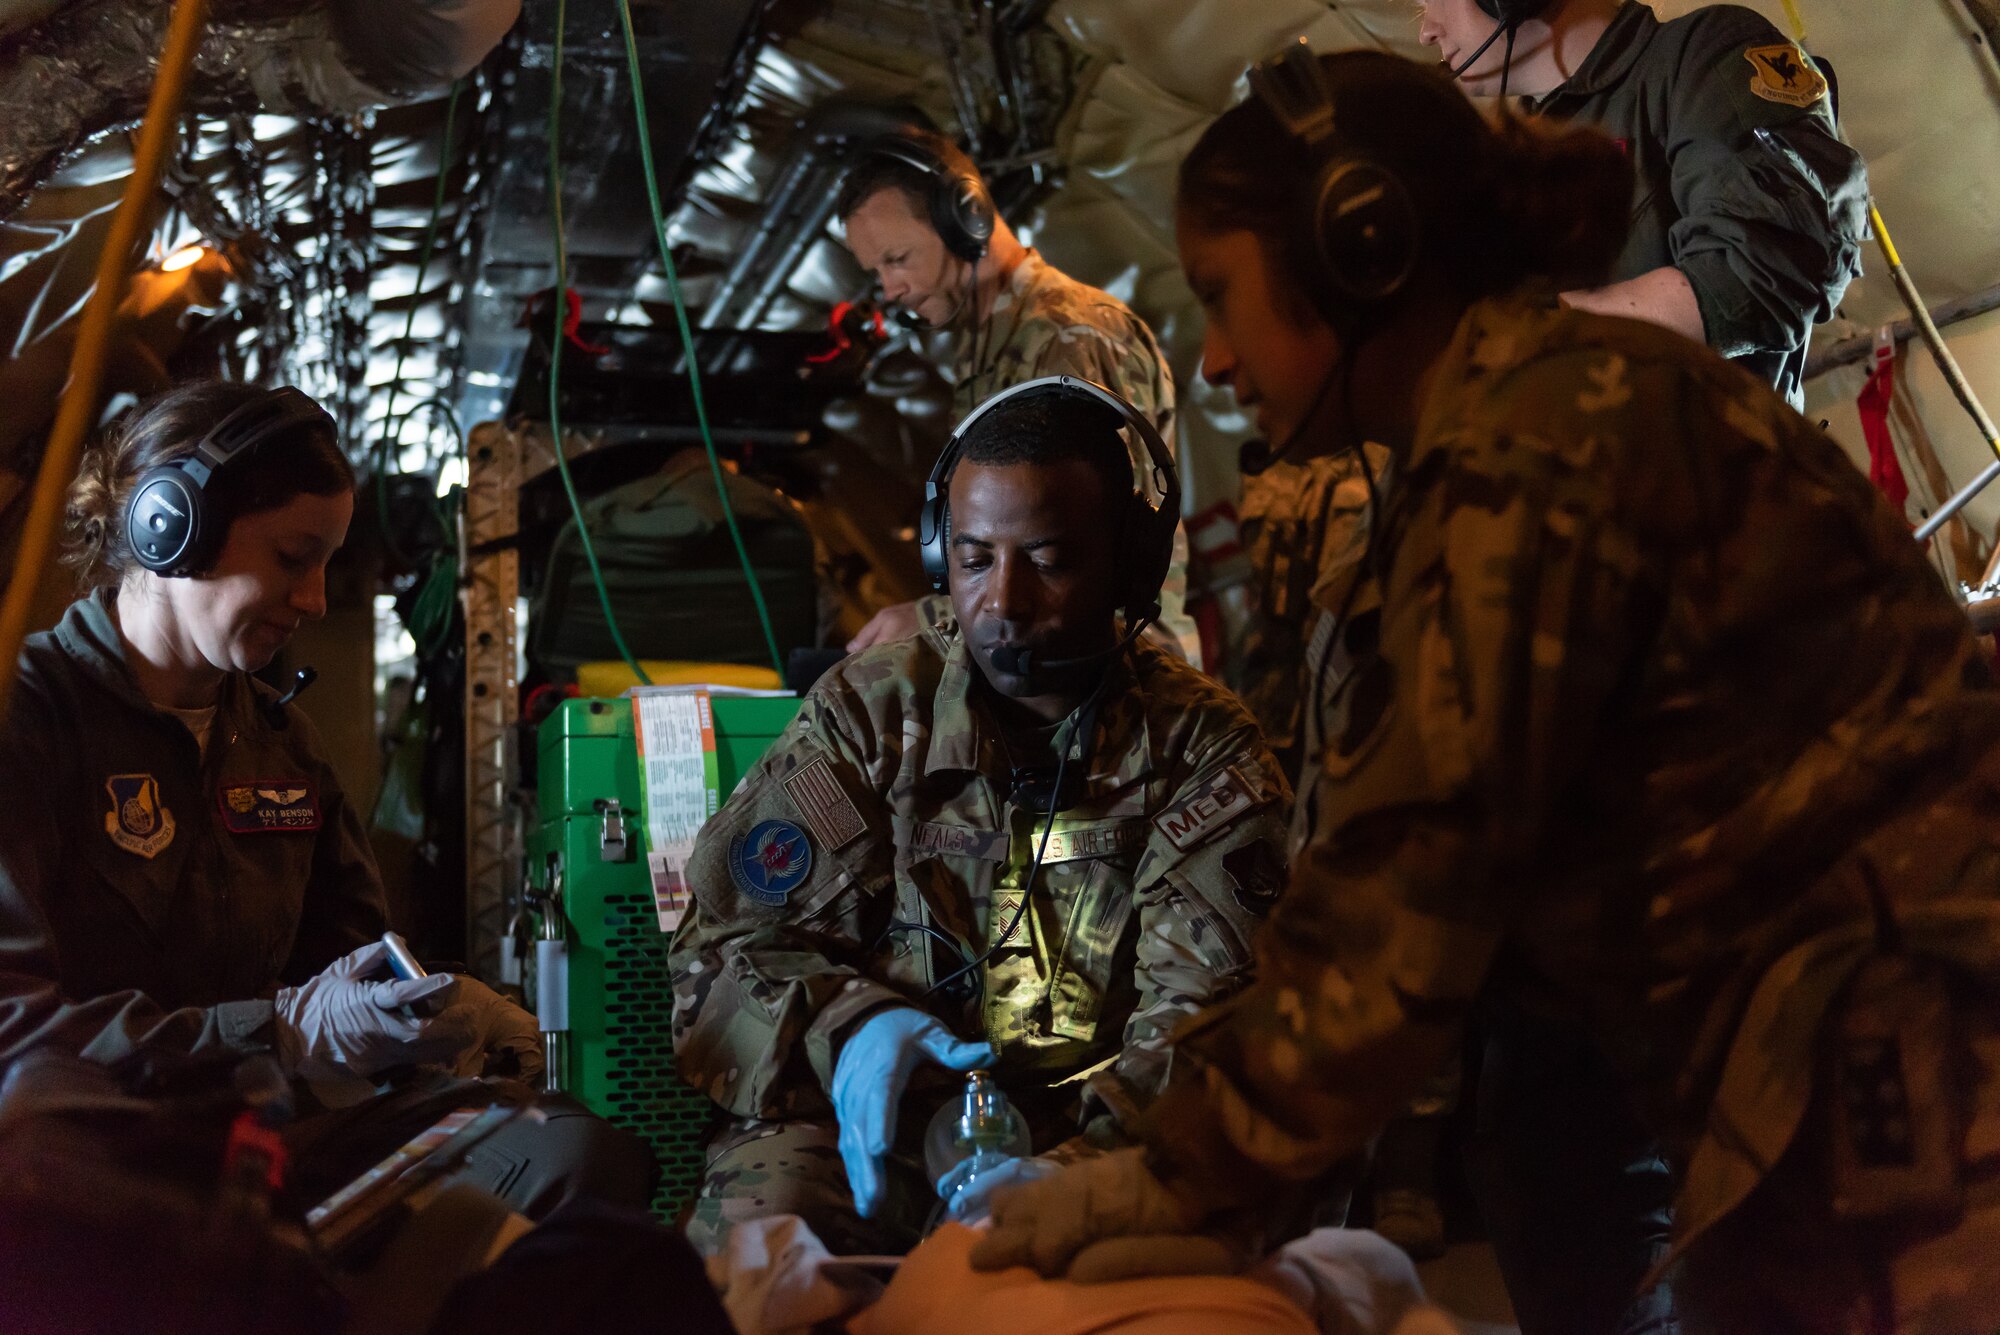 Airmen from the 18th Aeromedical Evacuation Squadron simulate life-saving procedures to a training mannequin onboard a KC-135 Stratotanker during an exercise at Kadena Air Base, Japan, Oct. 8, 2019. The 18th AES deploys and operates elements of a theater aeromedical evacuation system capable of worldwide taskings. (U.S. Air Force photo by Senior Airman Matthew Seefeldt)